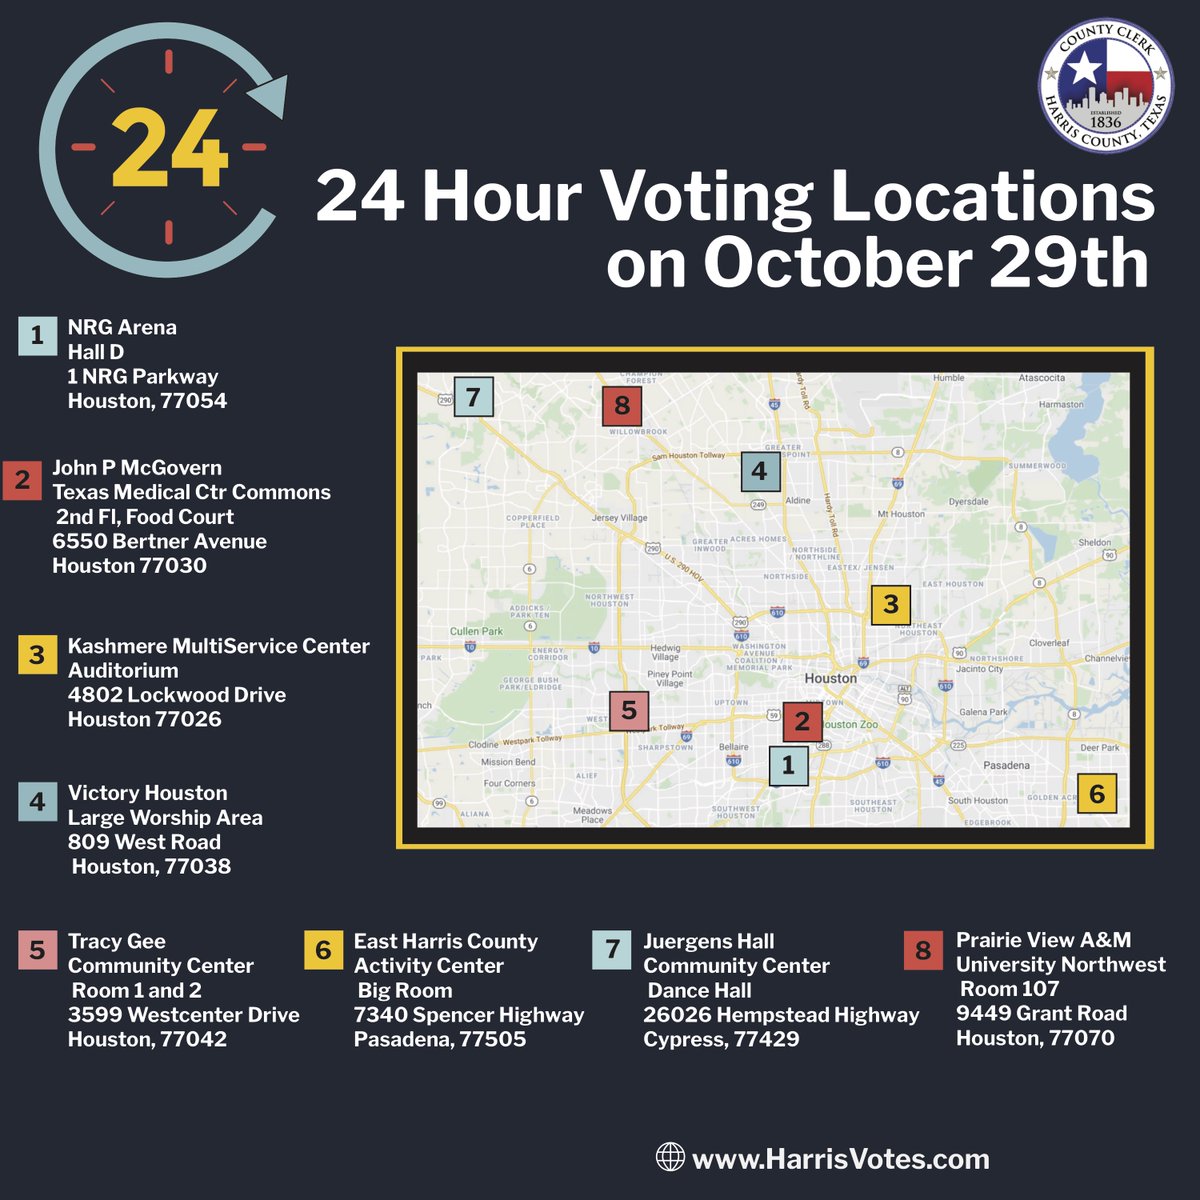 We’re calling this 24-Hour Voting, though, yes, it is technically 36 straight hours of voting at these eight locations. The point is that these locations will be open overnight to serve shift workers.  #HarrisVotes